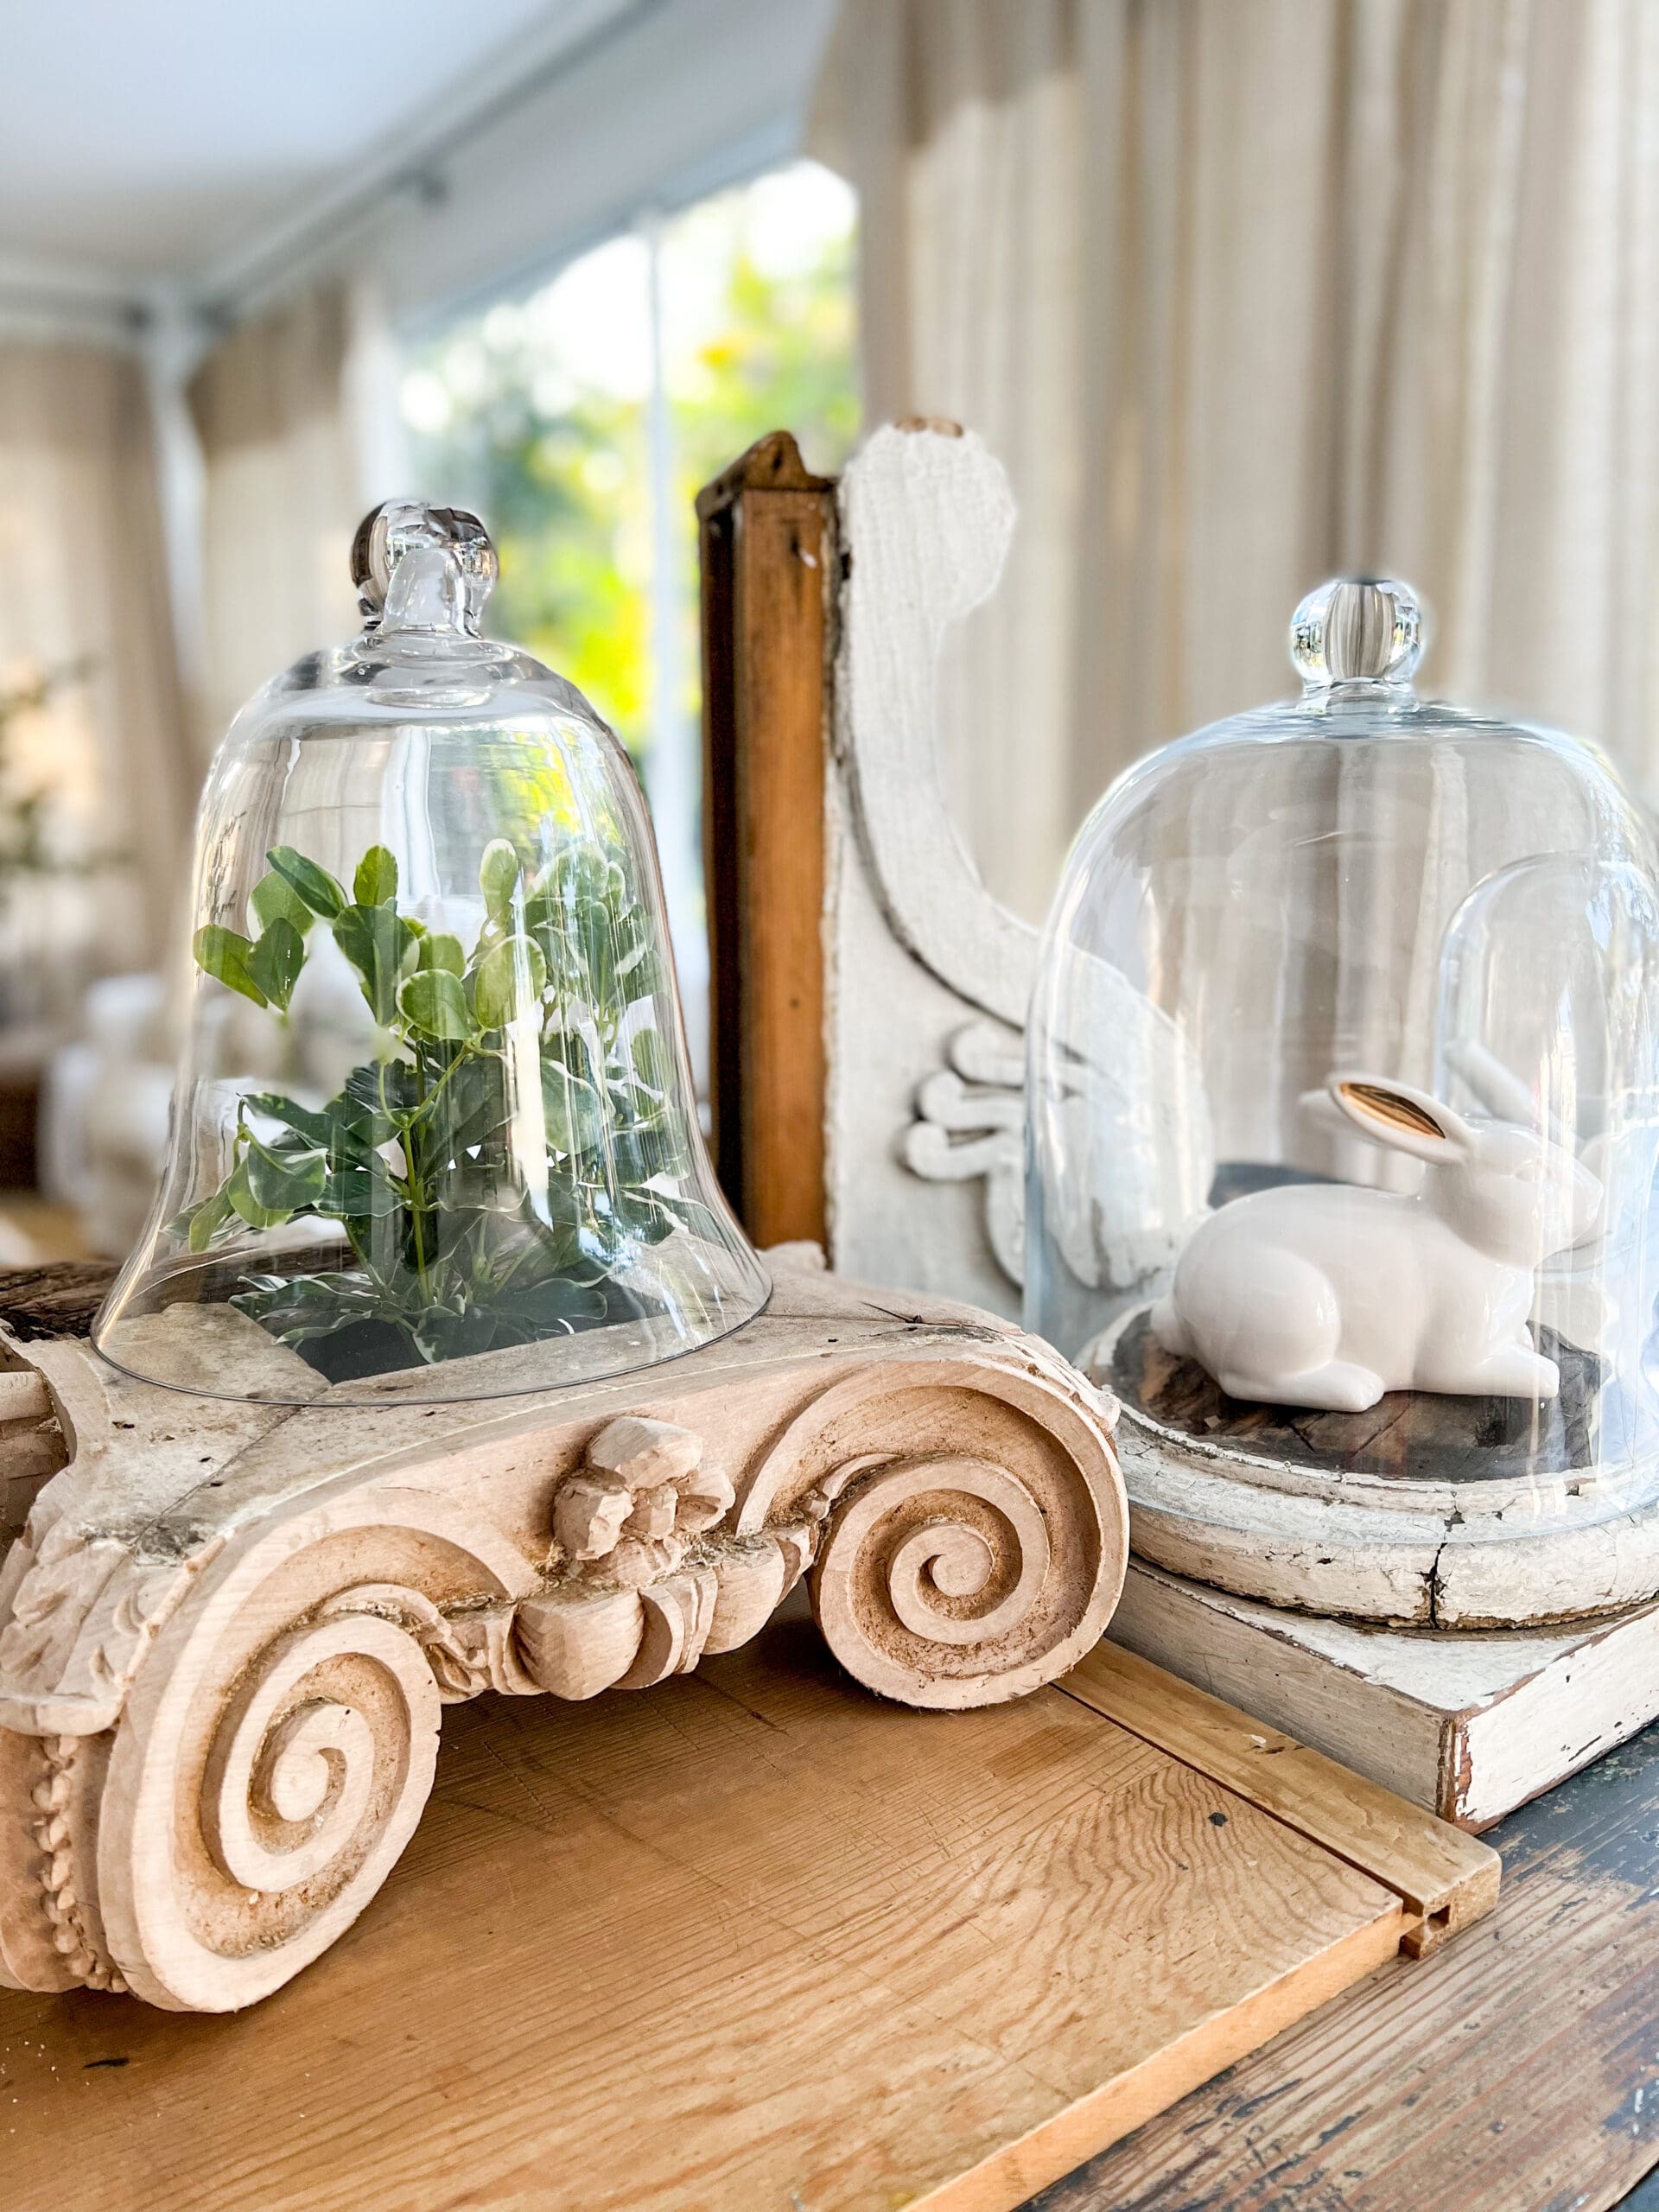 Vintage Decor Ideas to Get the Look on a Budget